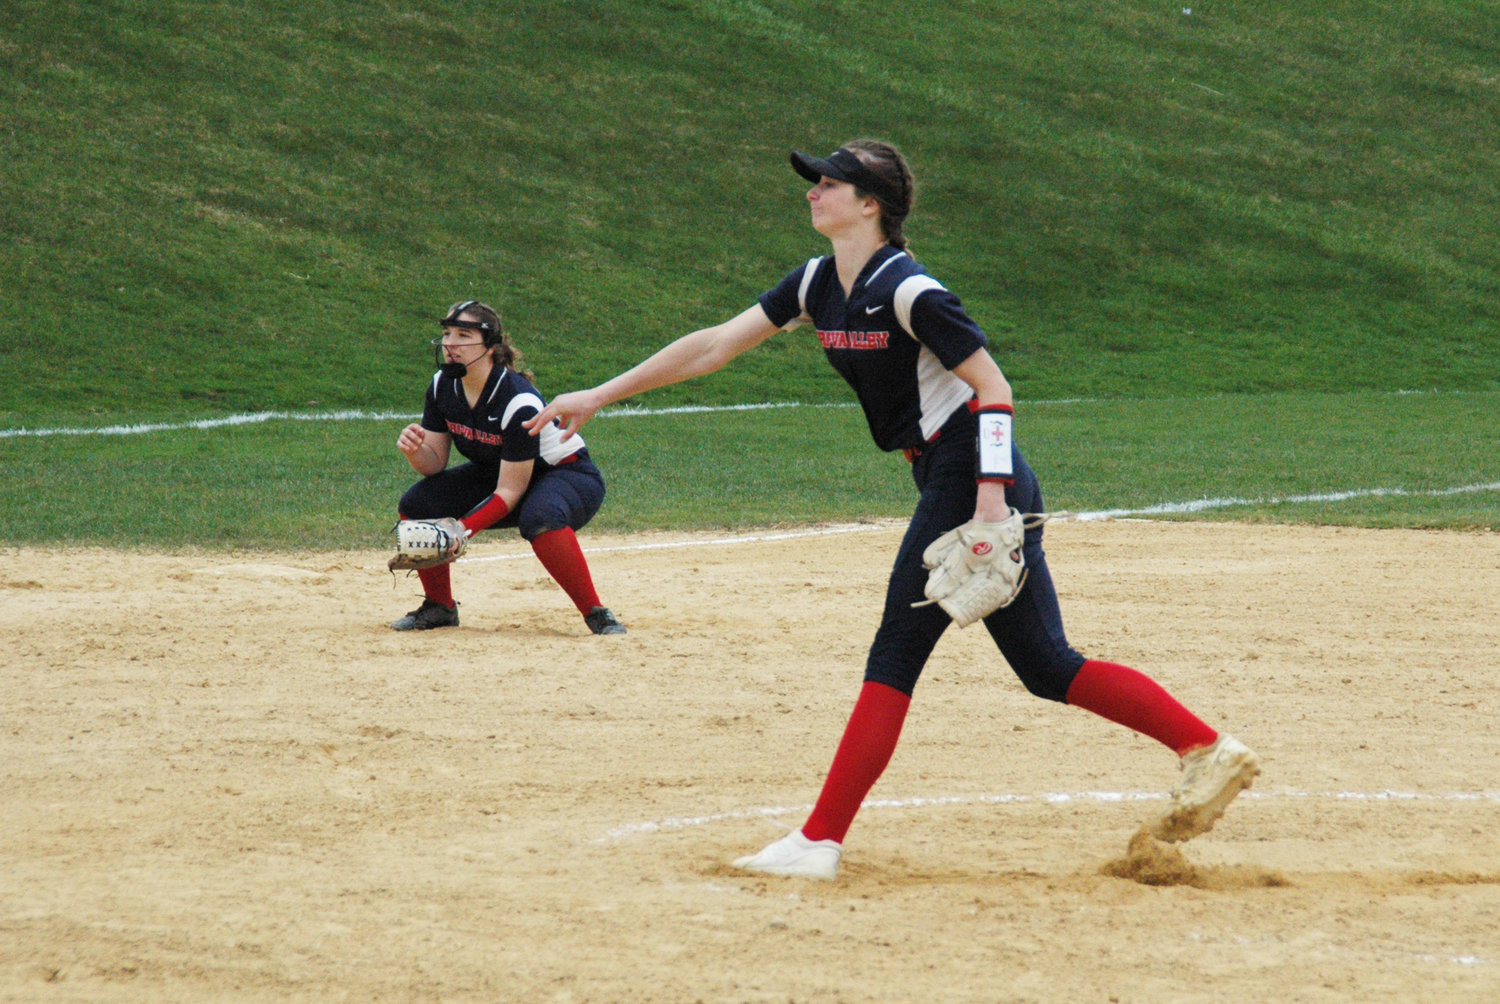 Jenna Carmody had a great game on Monday for Tri-Valley. Throwing a complete game with seven strikeouts, getting four hits, including two home runs, and earning the victory over Liberty, she was doing it all out there.